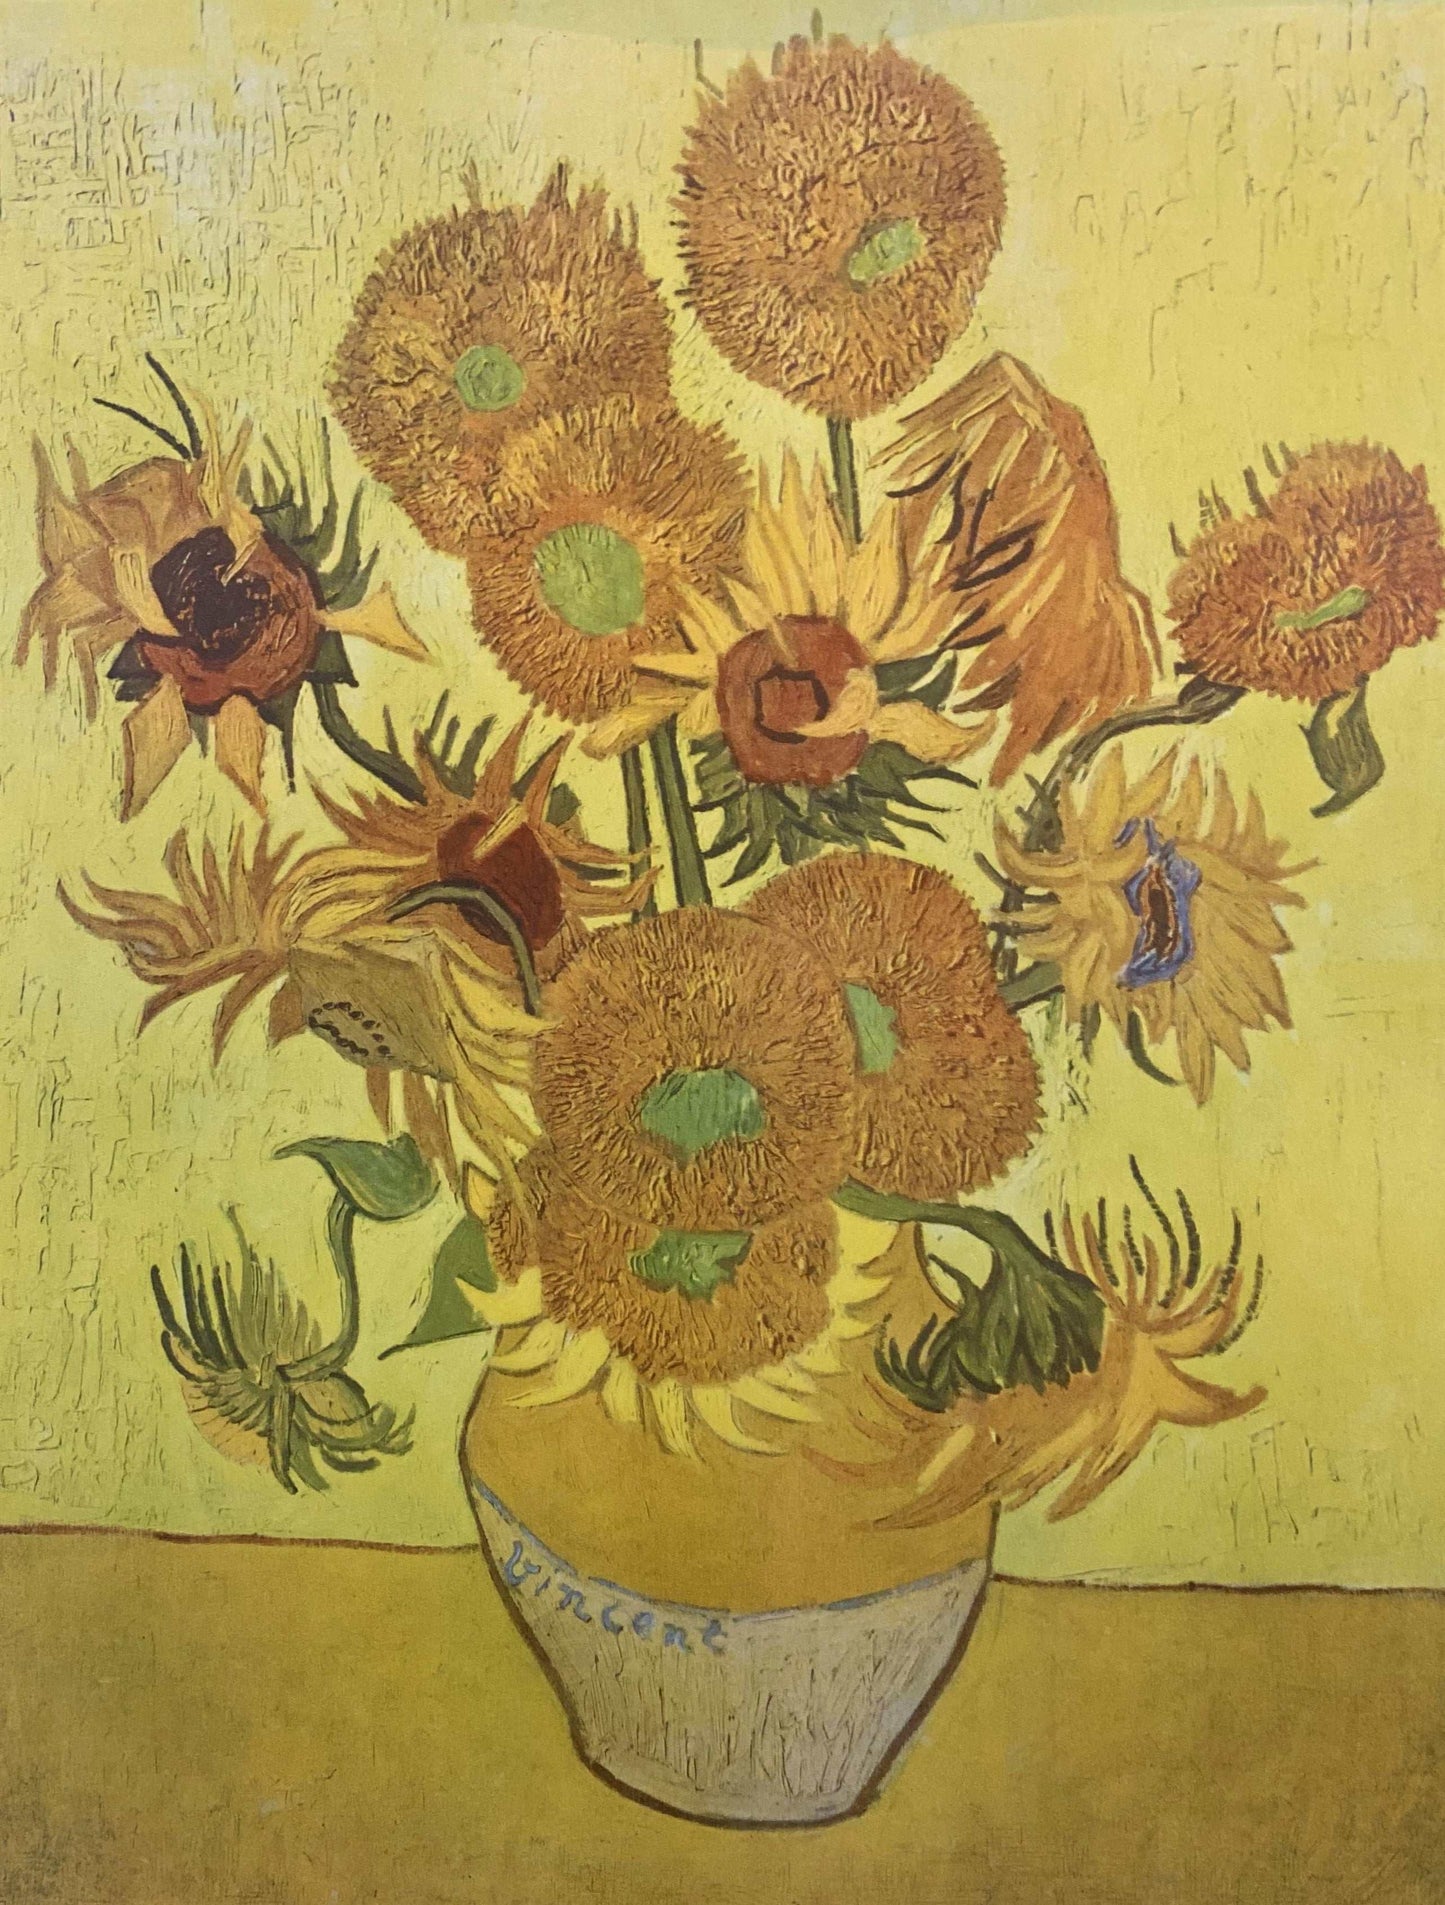 Vincent VAN GOGH Lithograph Limited Edition "Sunflowers" 1937